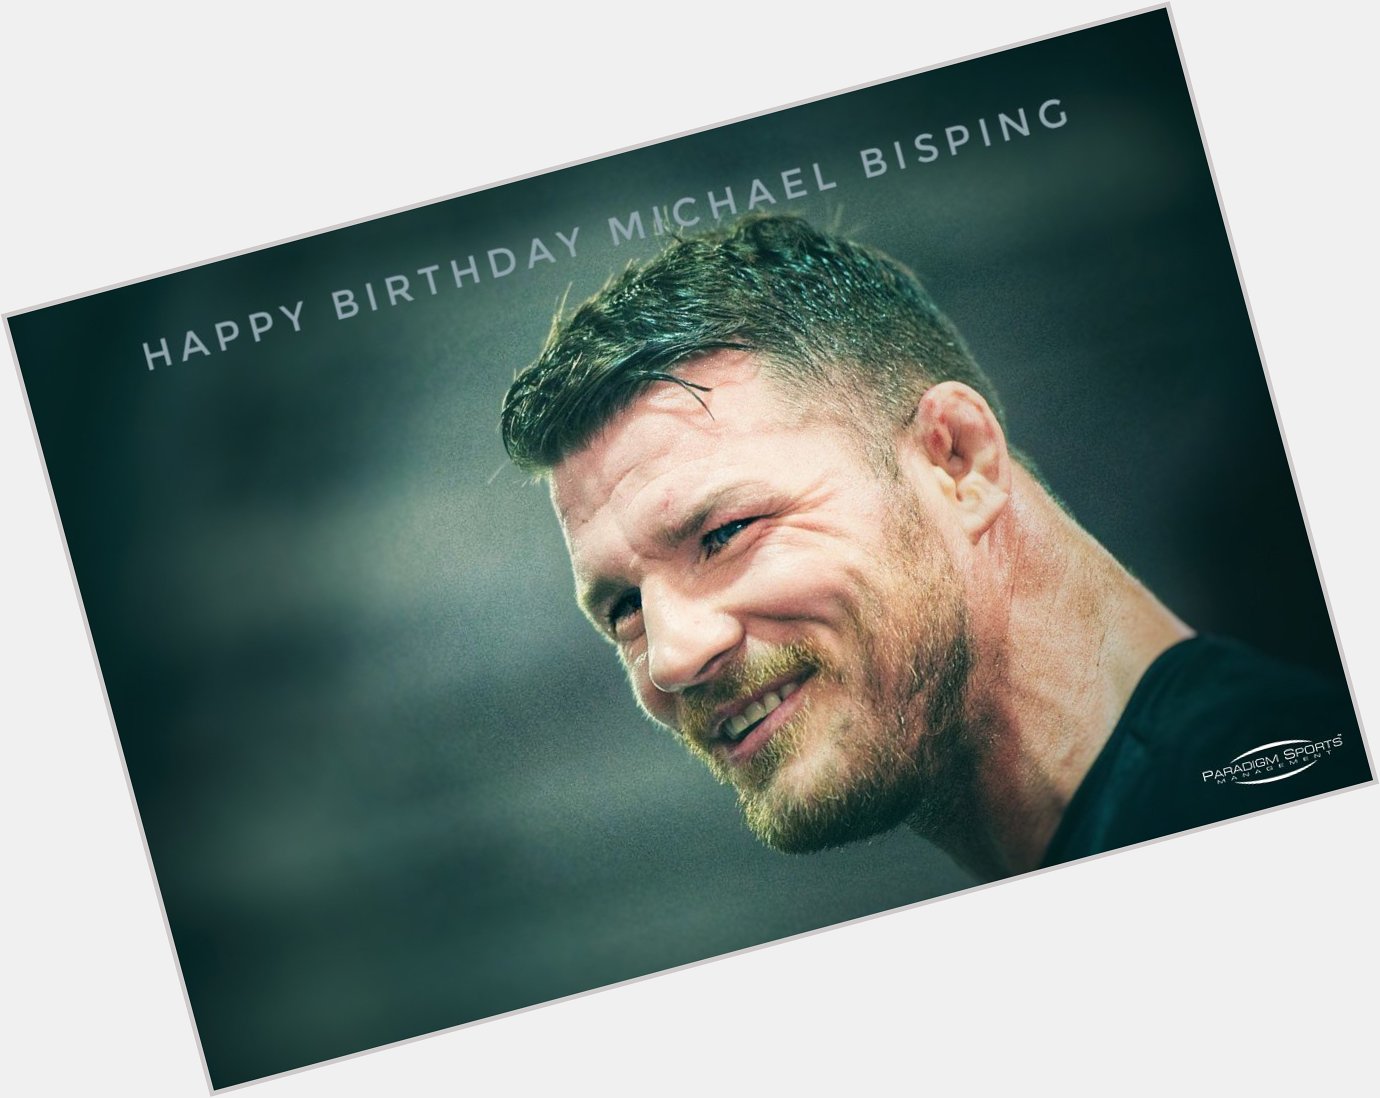 Join us in wishing Michael Bisping ( a very Happy Birthday. Have a good one Mike!  